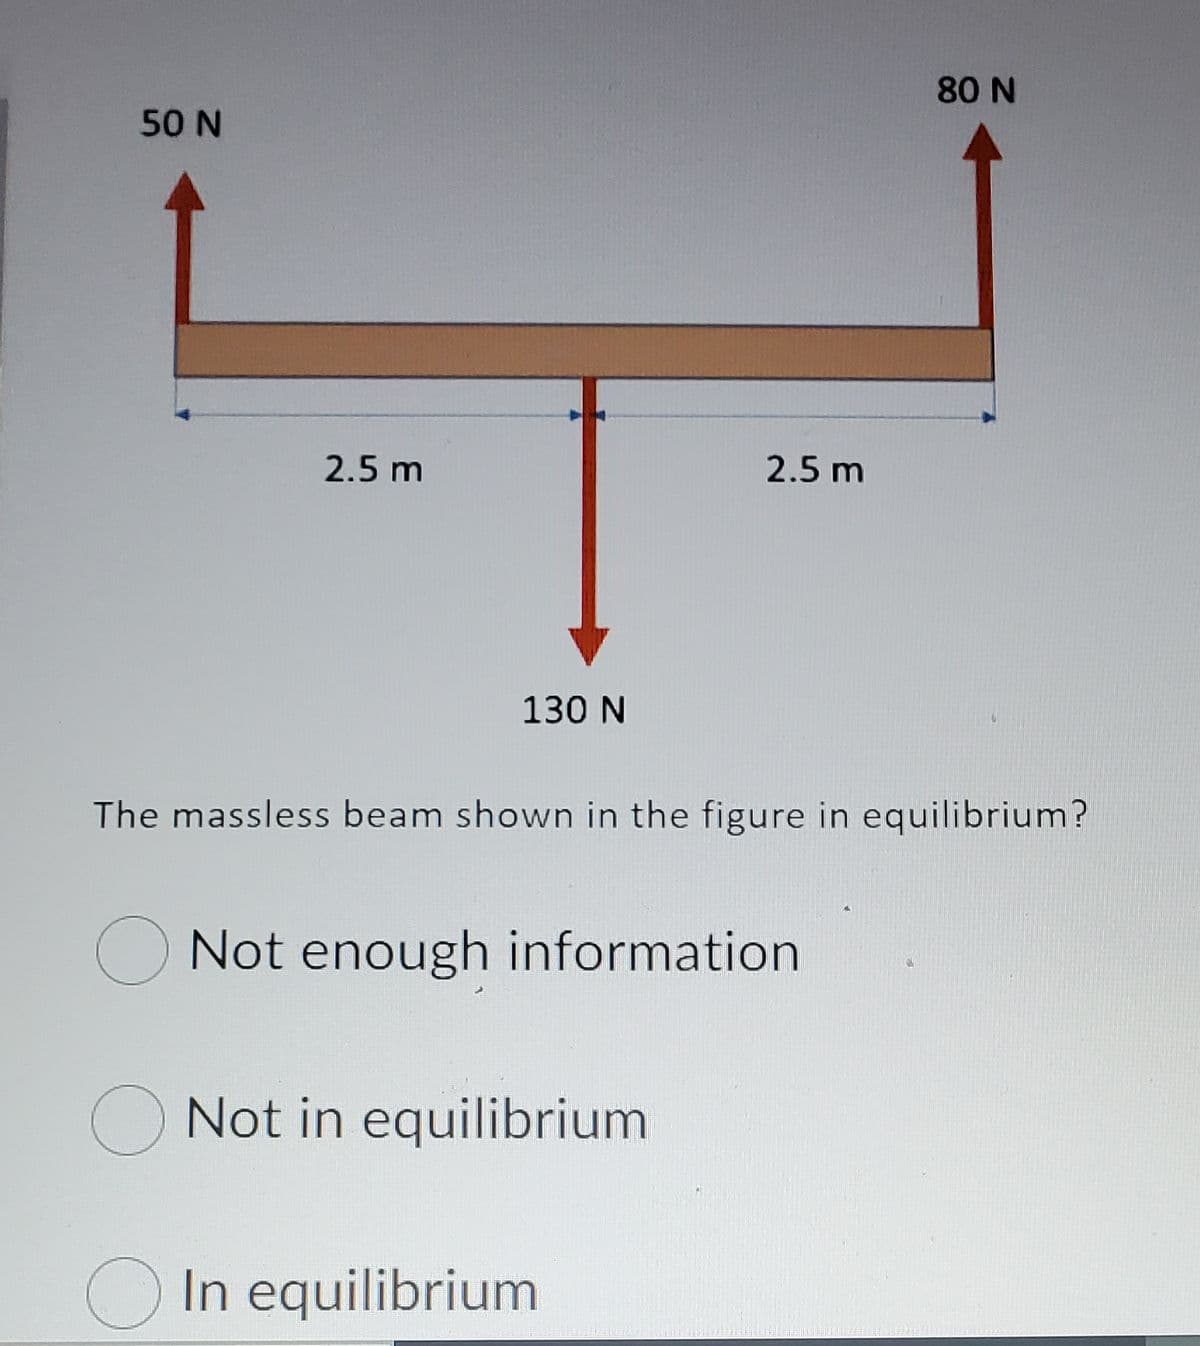 80 N
50 N
2.5 m
2.5 m
130 N
The massless beam shown in the figure in equilibrium?
Not enough information
O Not in equilibrium
In equilibrium
